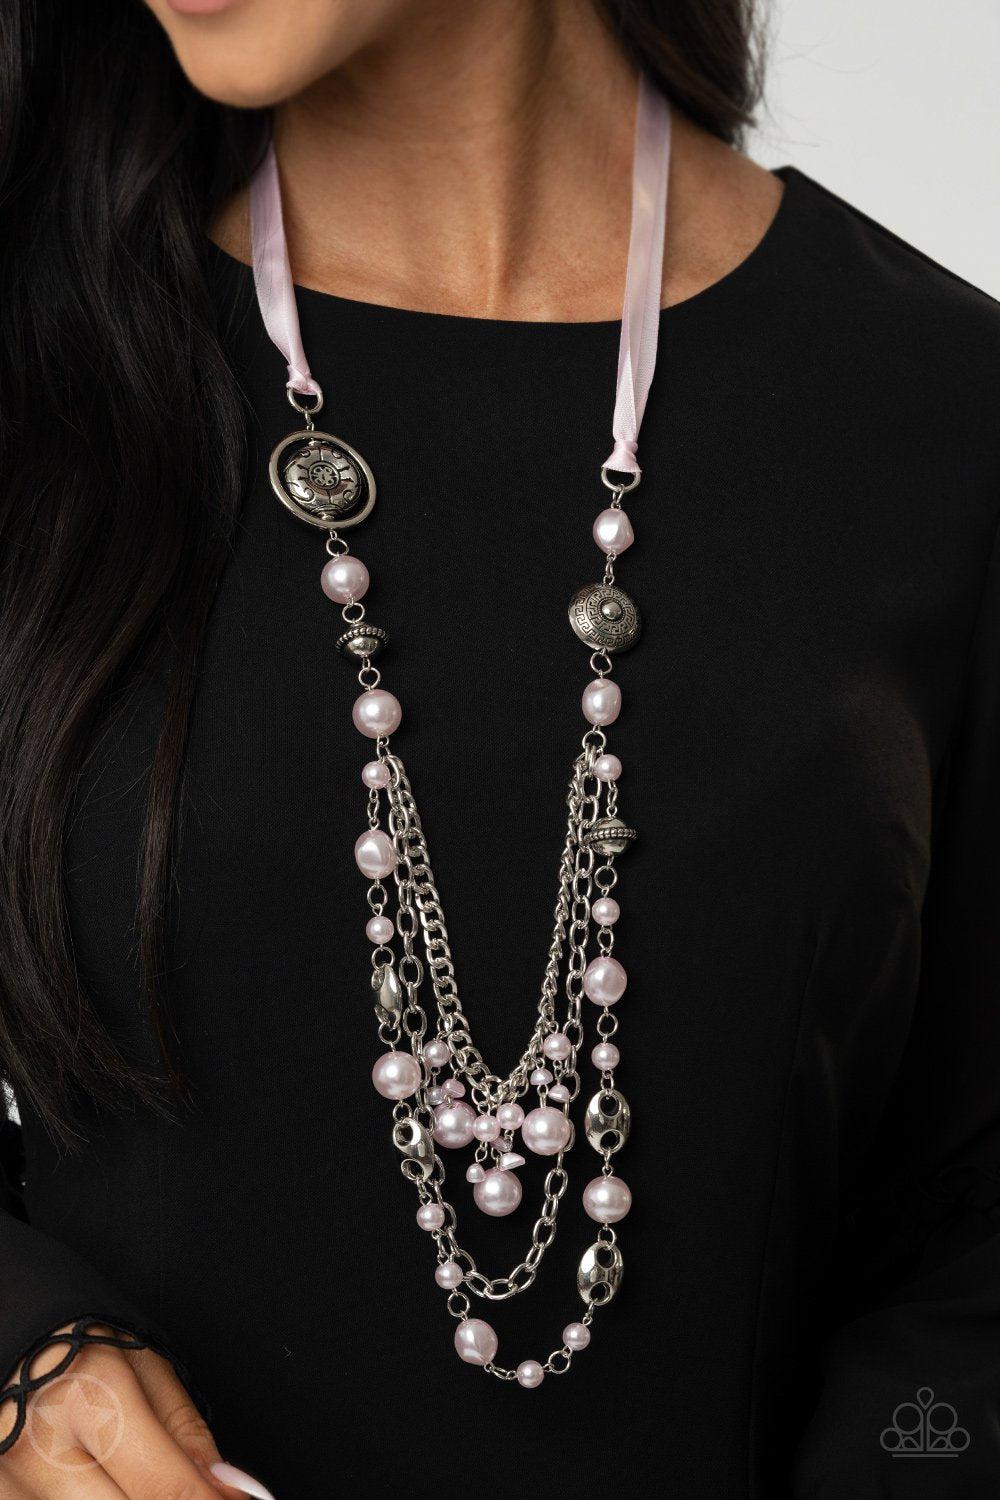 All The Trimmings Pink Ribbon Necklace - Paparazzi Accessories - model -CarasShop.com - $5 Jewelry by Cara Jewels